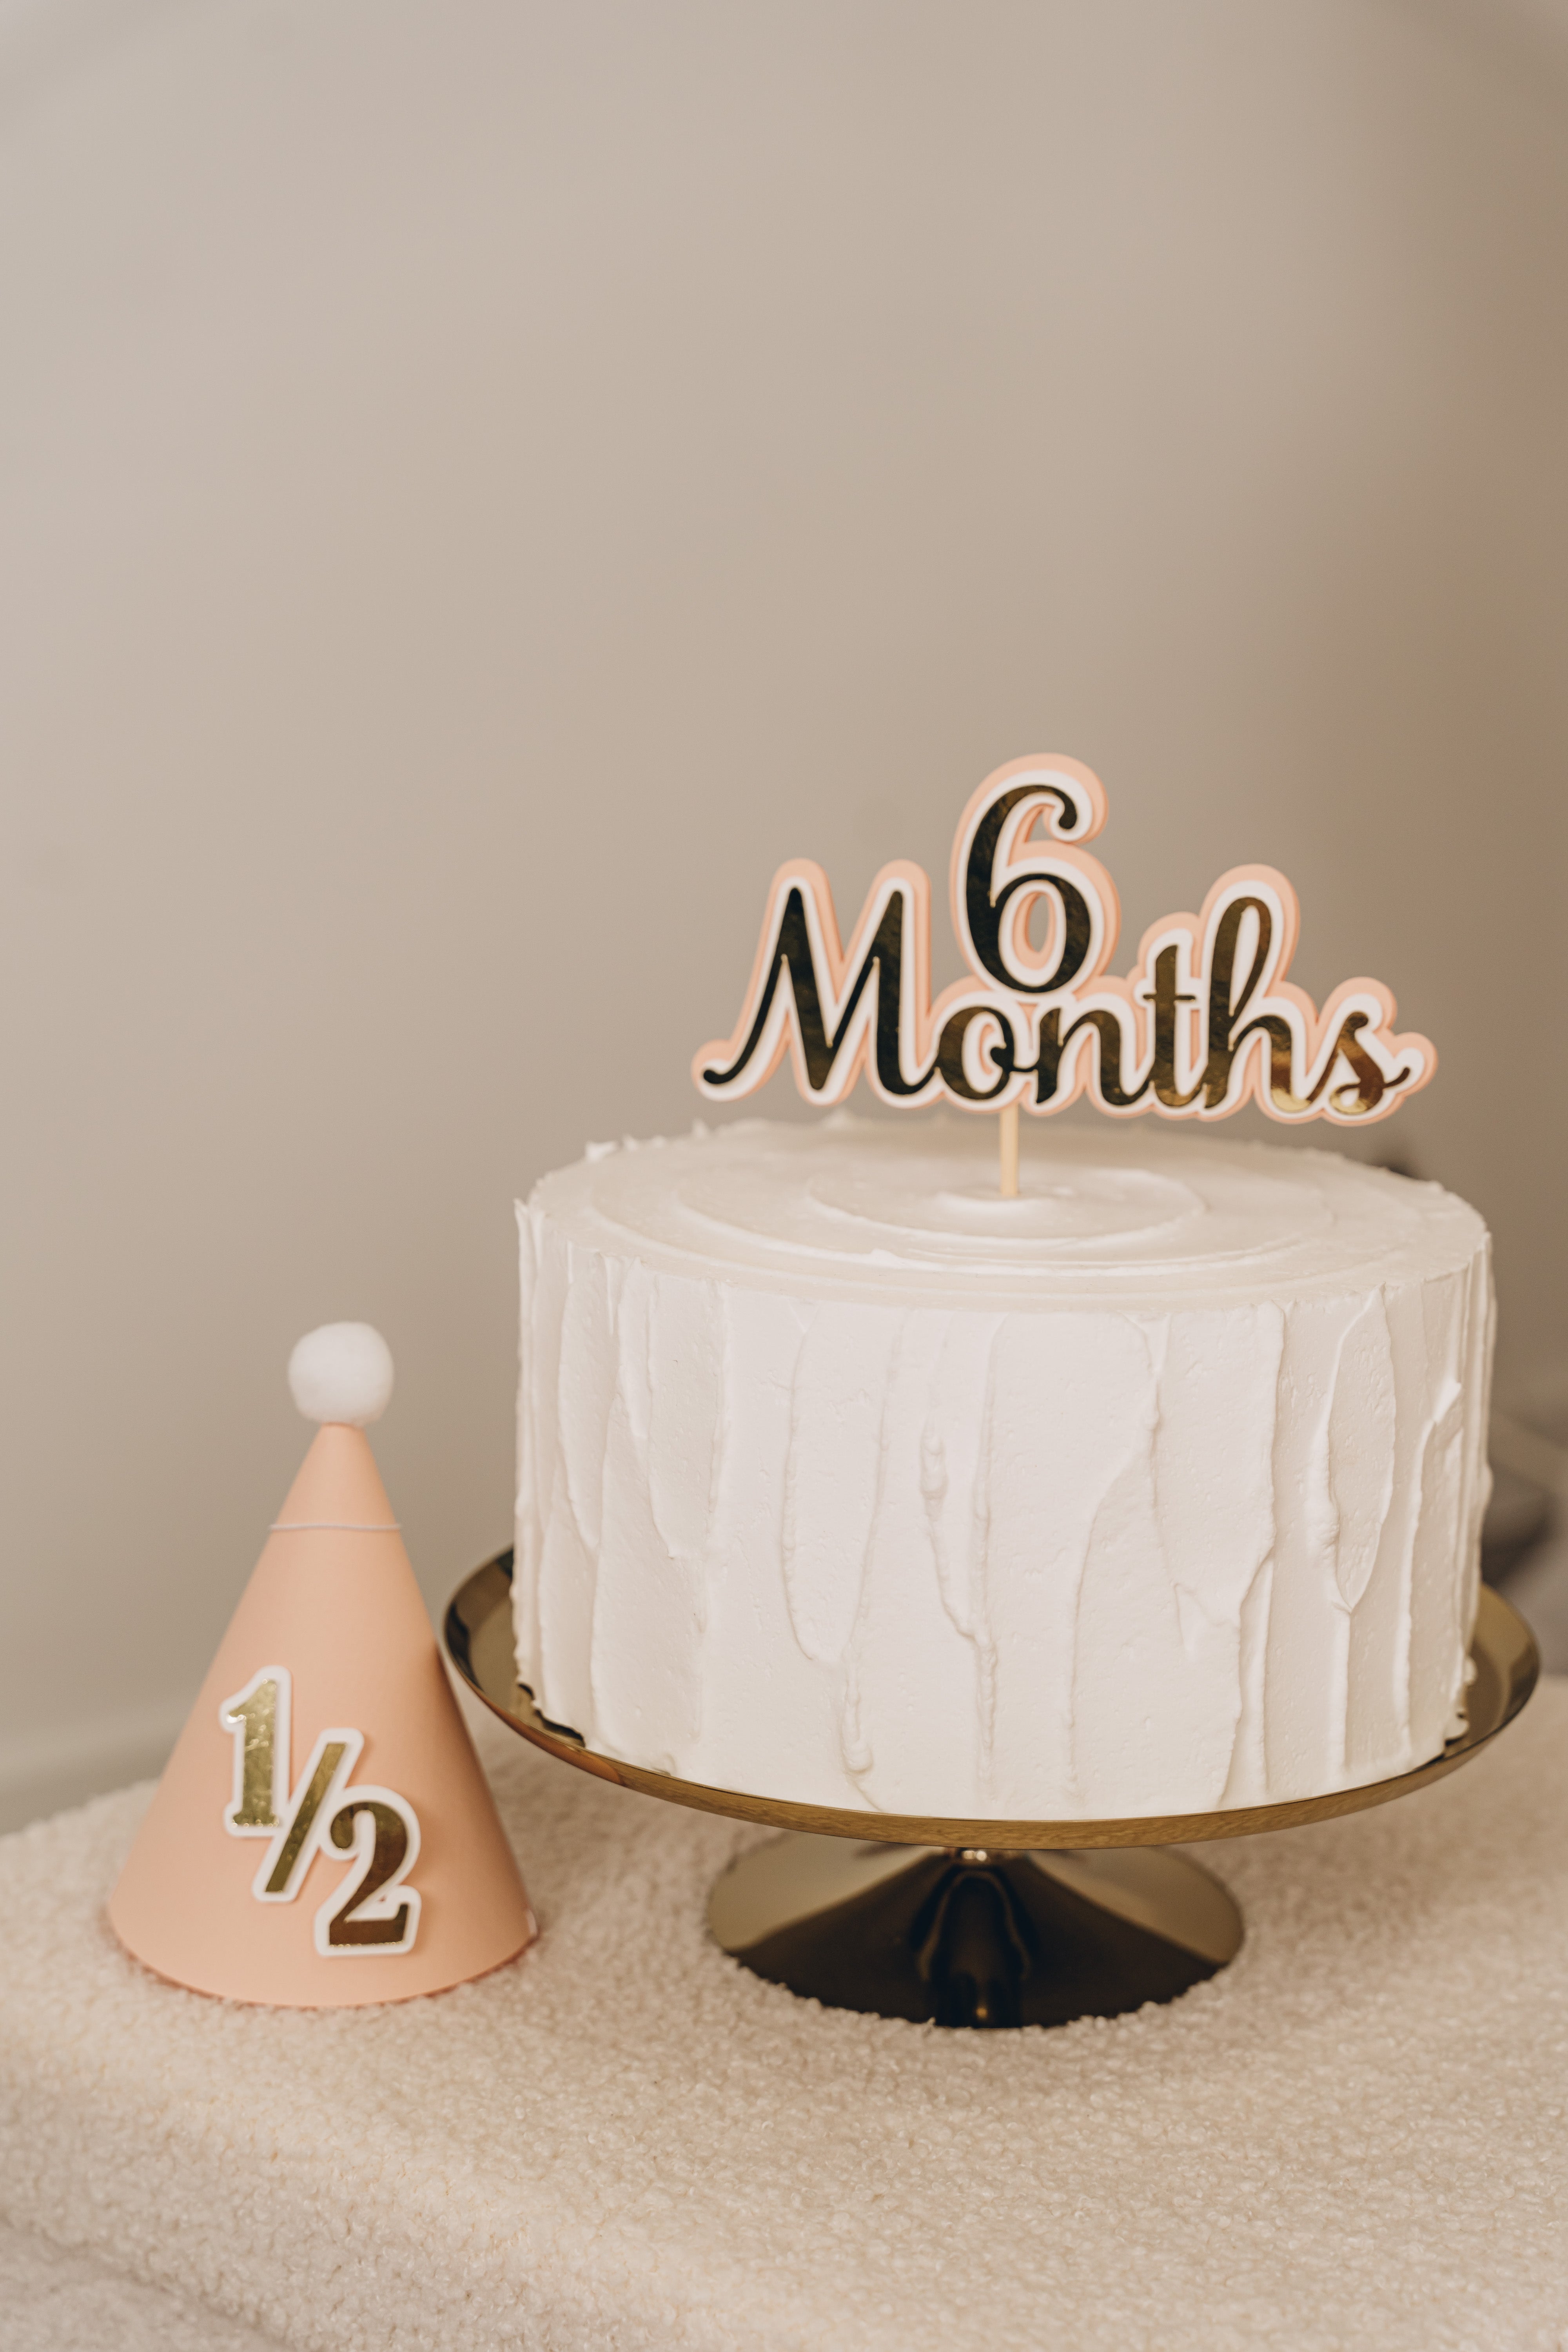 Party Propz Glitter 6 Months Birthday Cake Topper Golden Online in India,  Buy at Best Price from Firstcry.com - 9093200